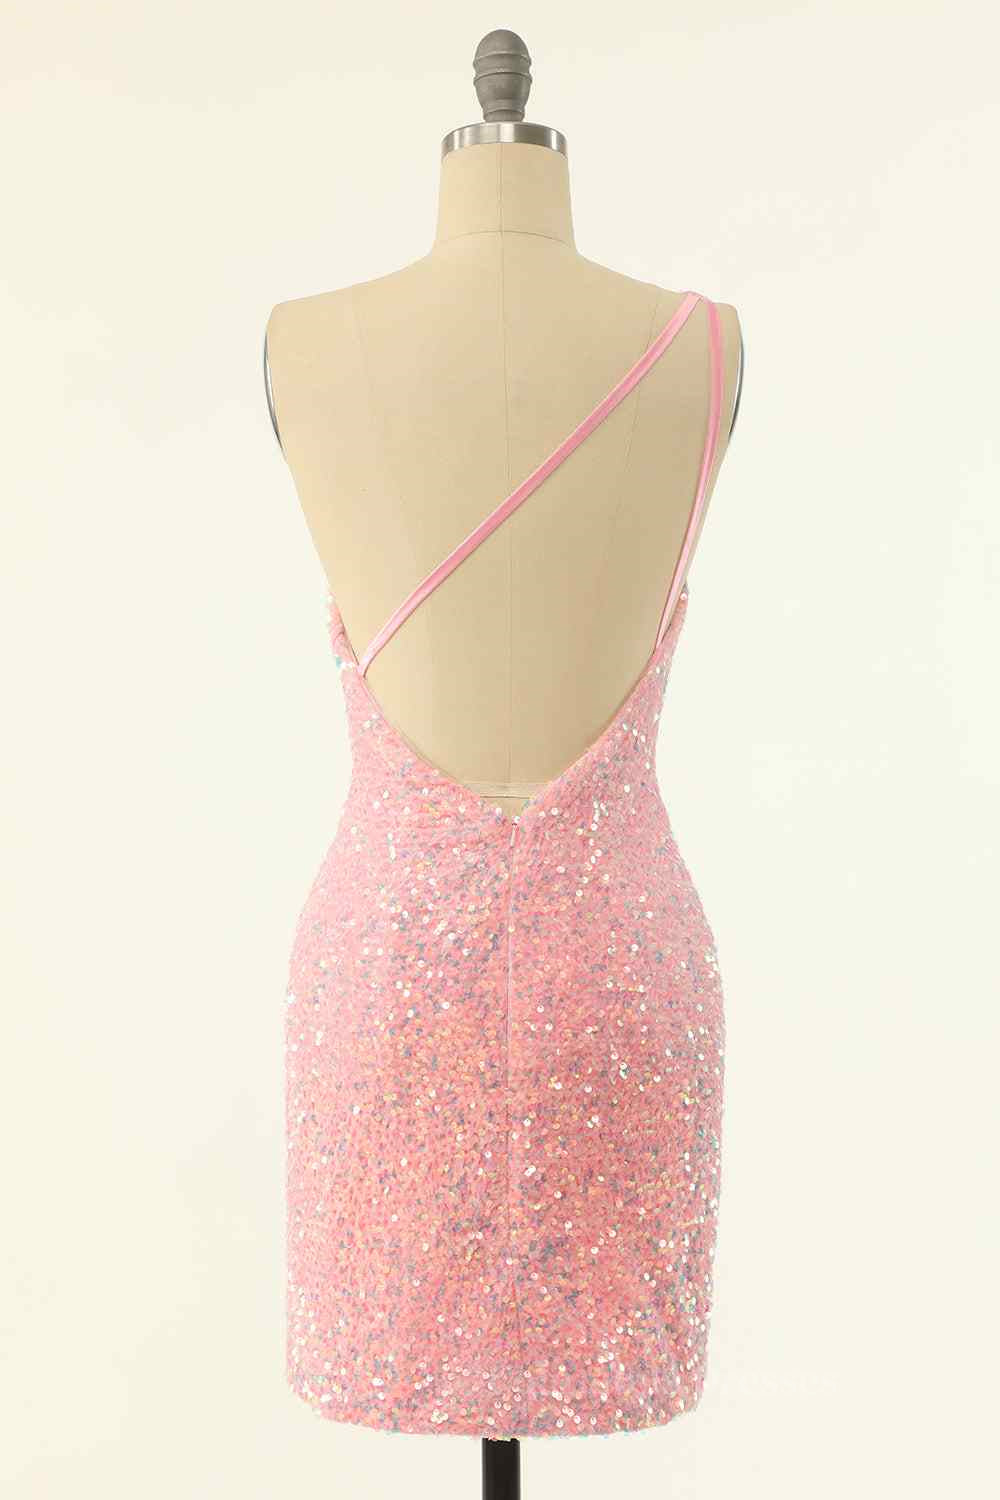 Party Dresses Night Out, Pink Sheath One Shoulder Strap Back Sequins Mini Homecoming Dress